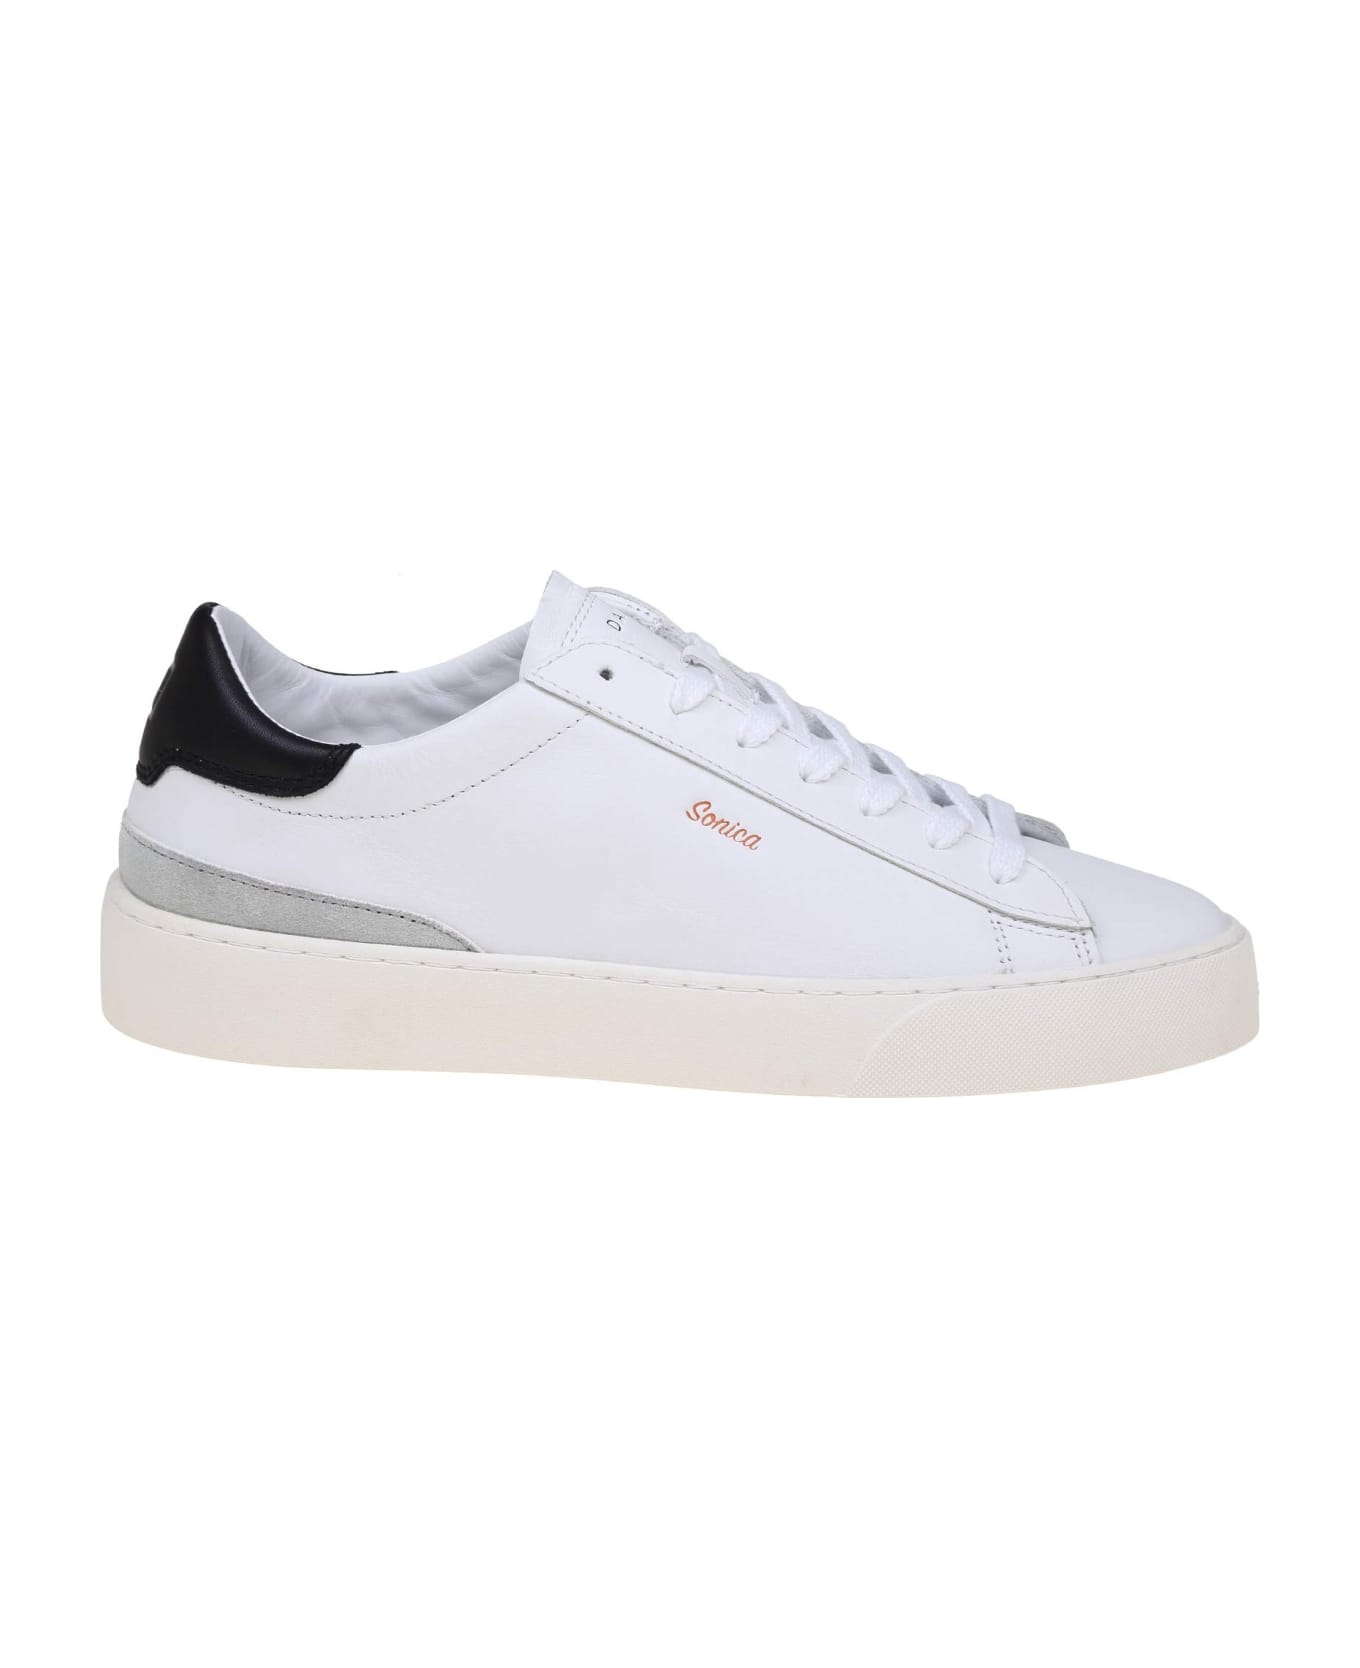 D.A.T.E. Sonica Sneakers In White/black Leather - White/Black スニーカー